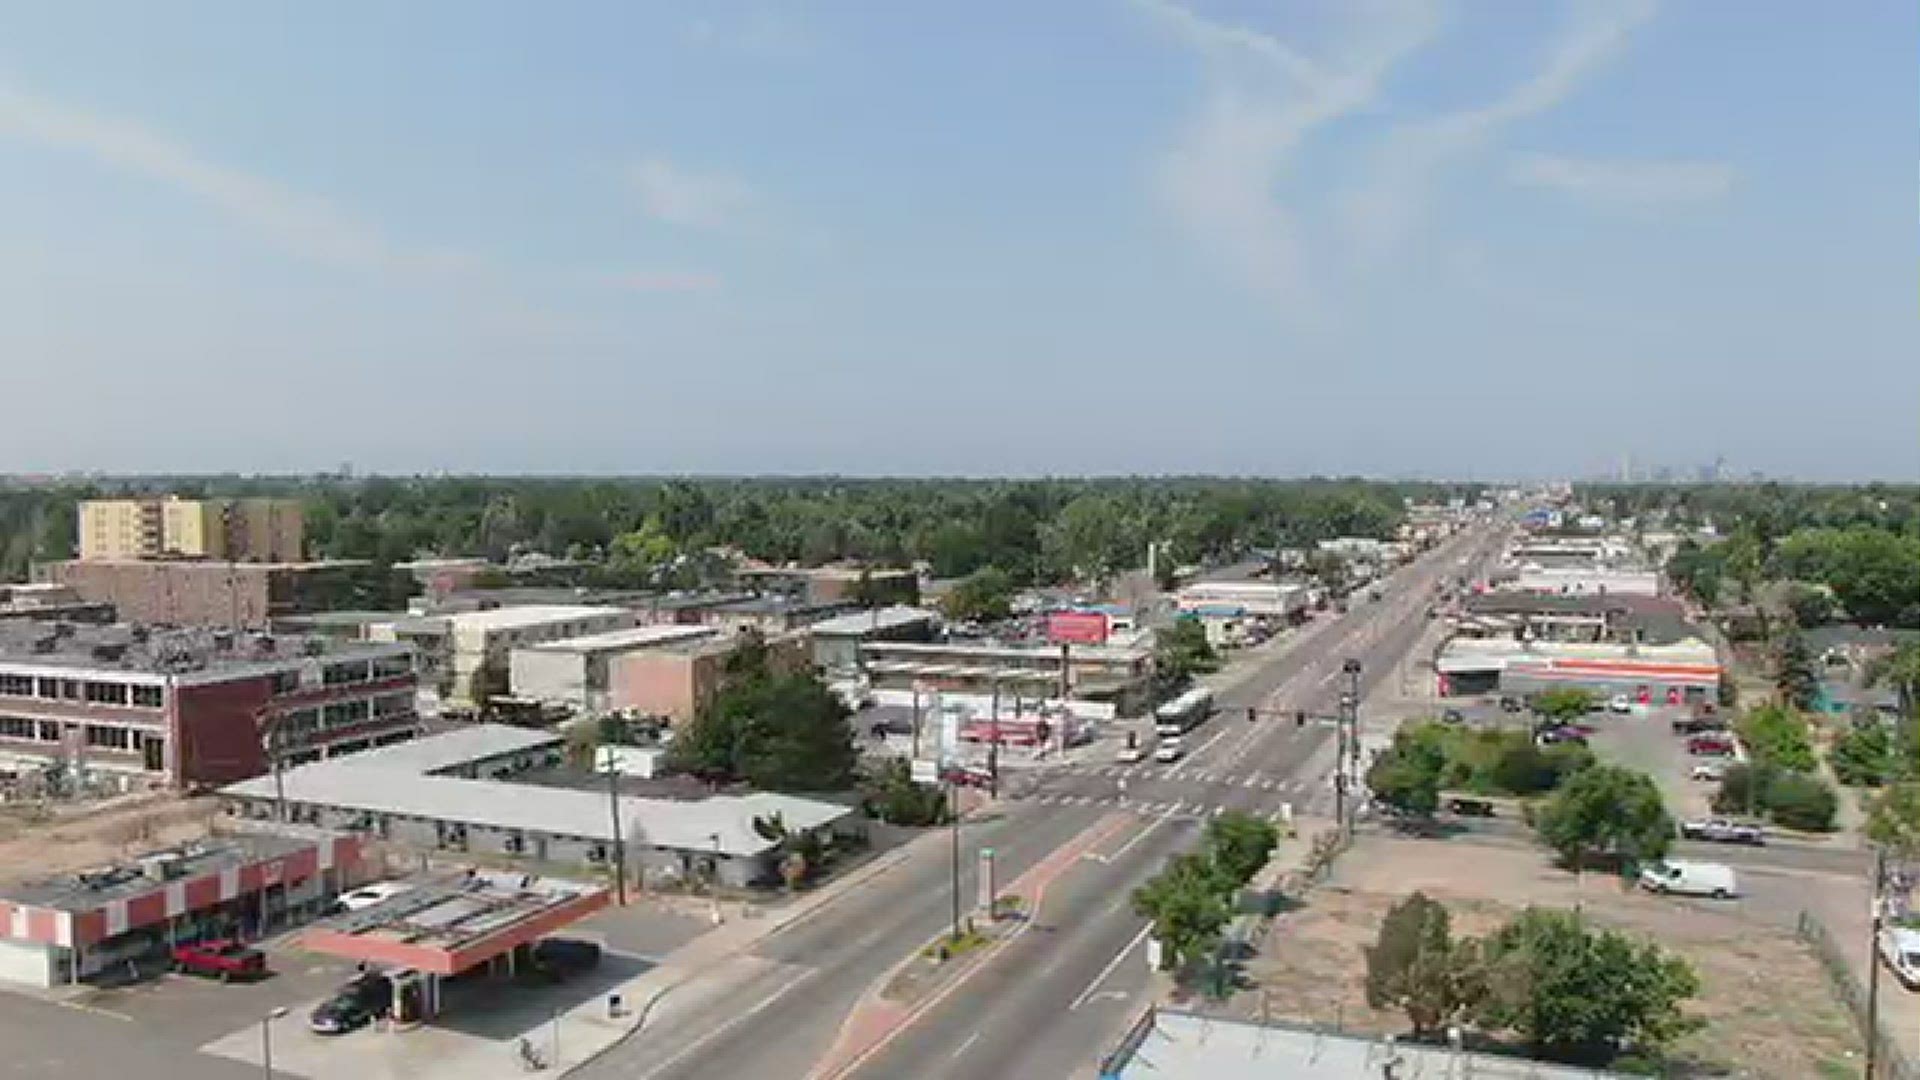 Raw video of the 9NEWS drone flying over East Colfax Avenue and Yosemite Street, which is one of Denver's five crime hot spots per the police department.